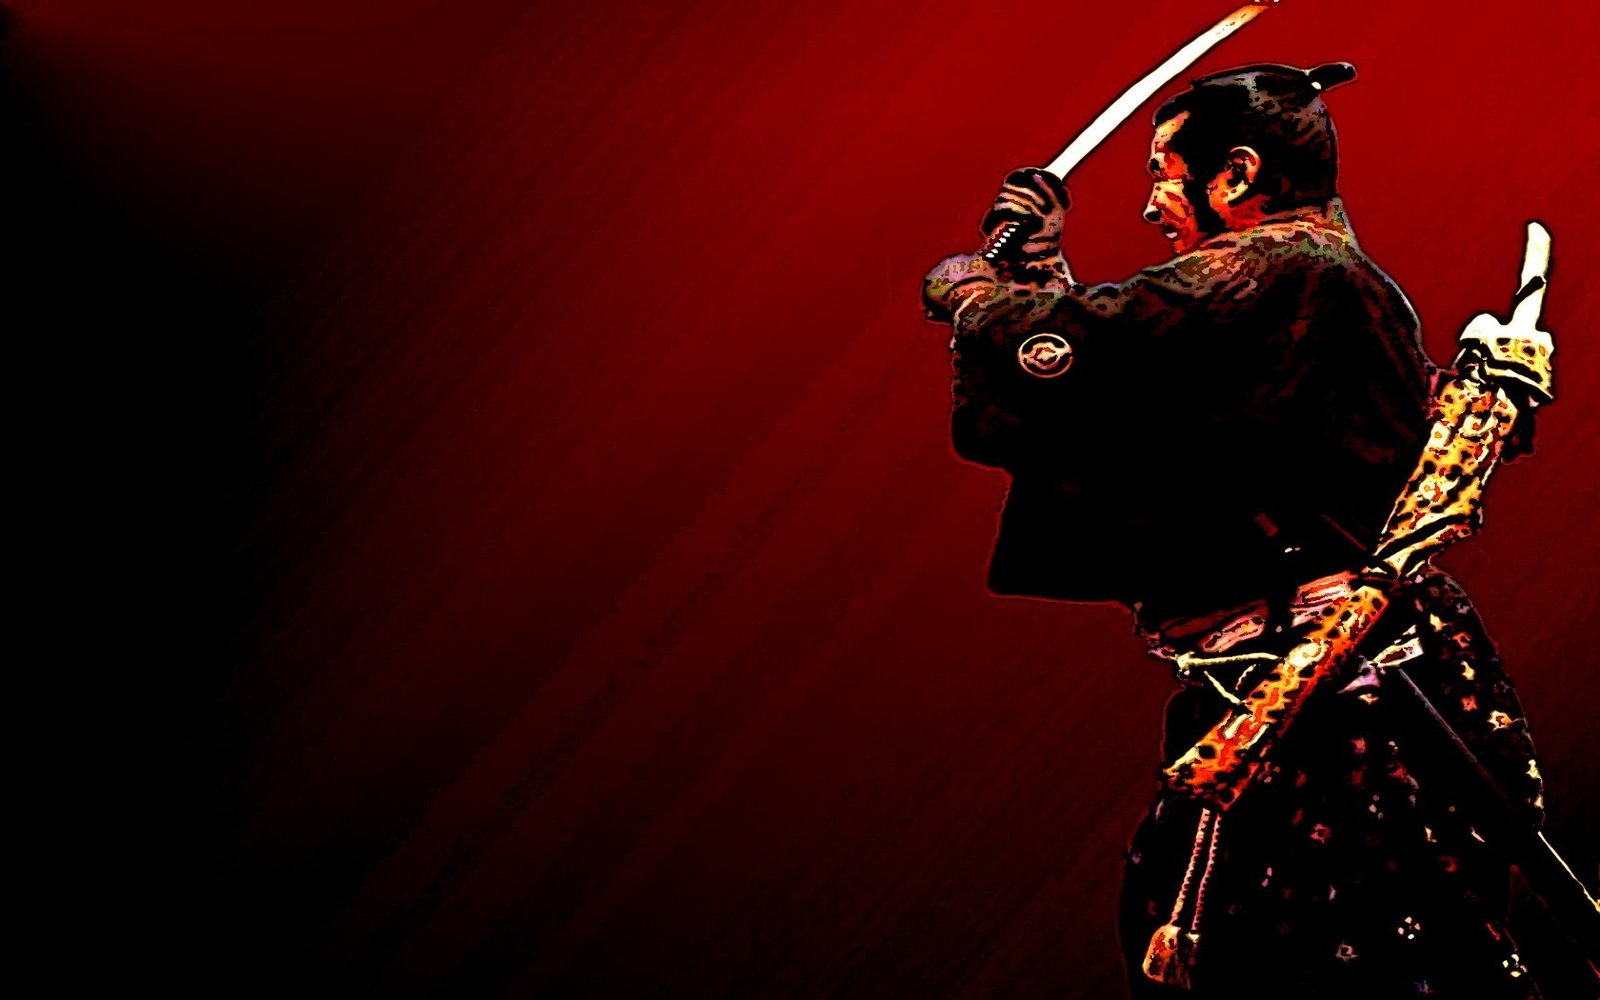 This image represents the samurai from the movie Red Sun. He was interpreted by Toshiro Mifune.